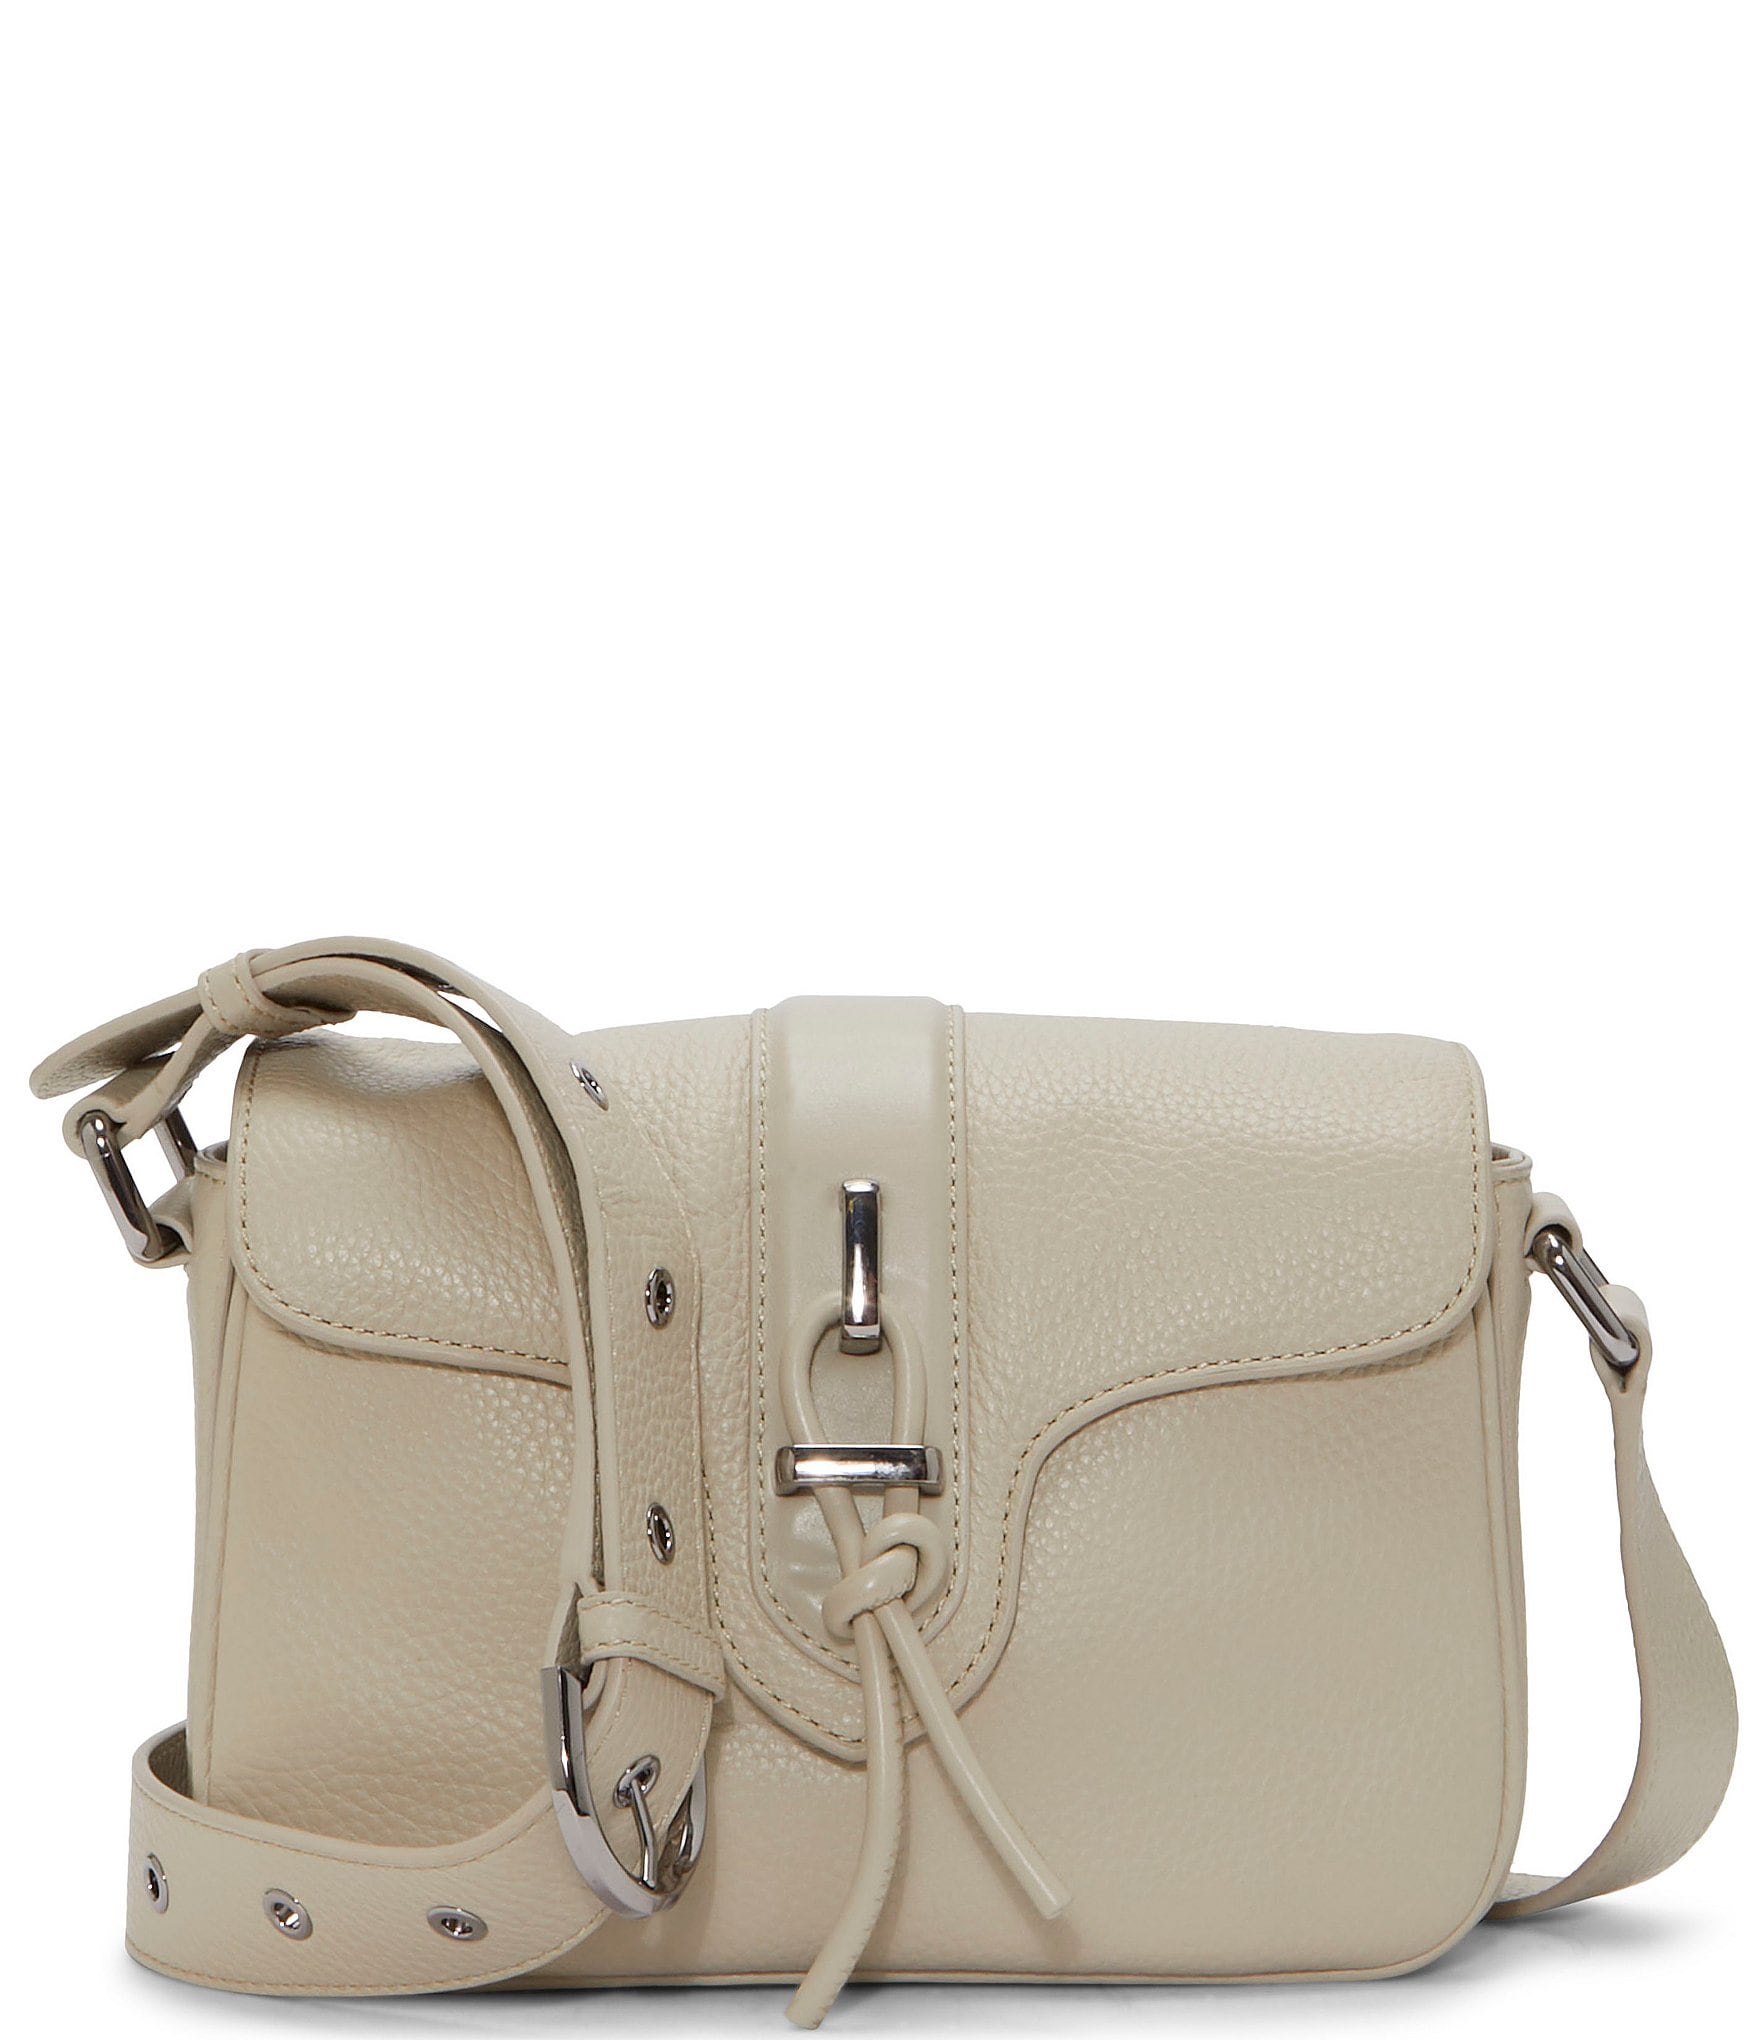 Vince Camuto Maecy Crossbody, Black Leather